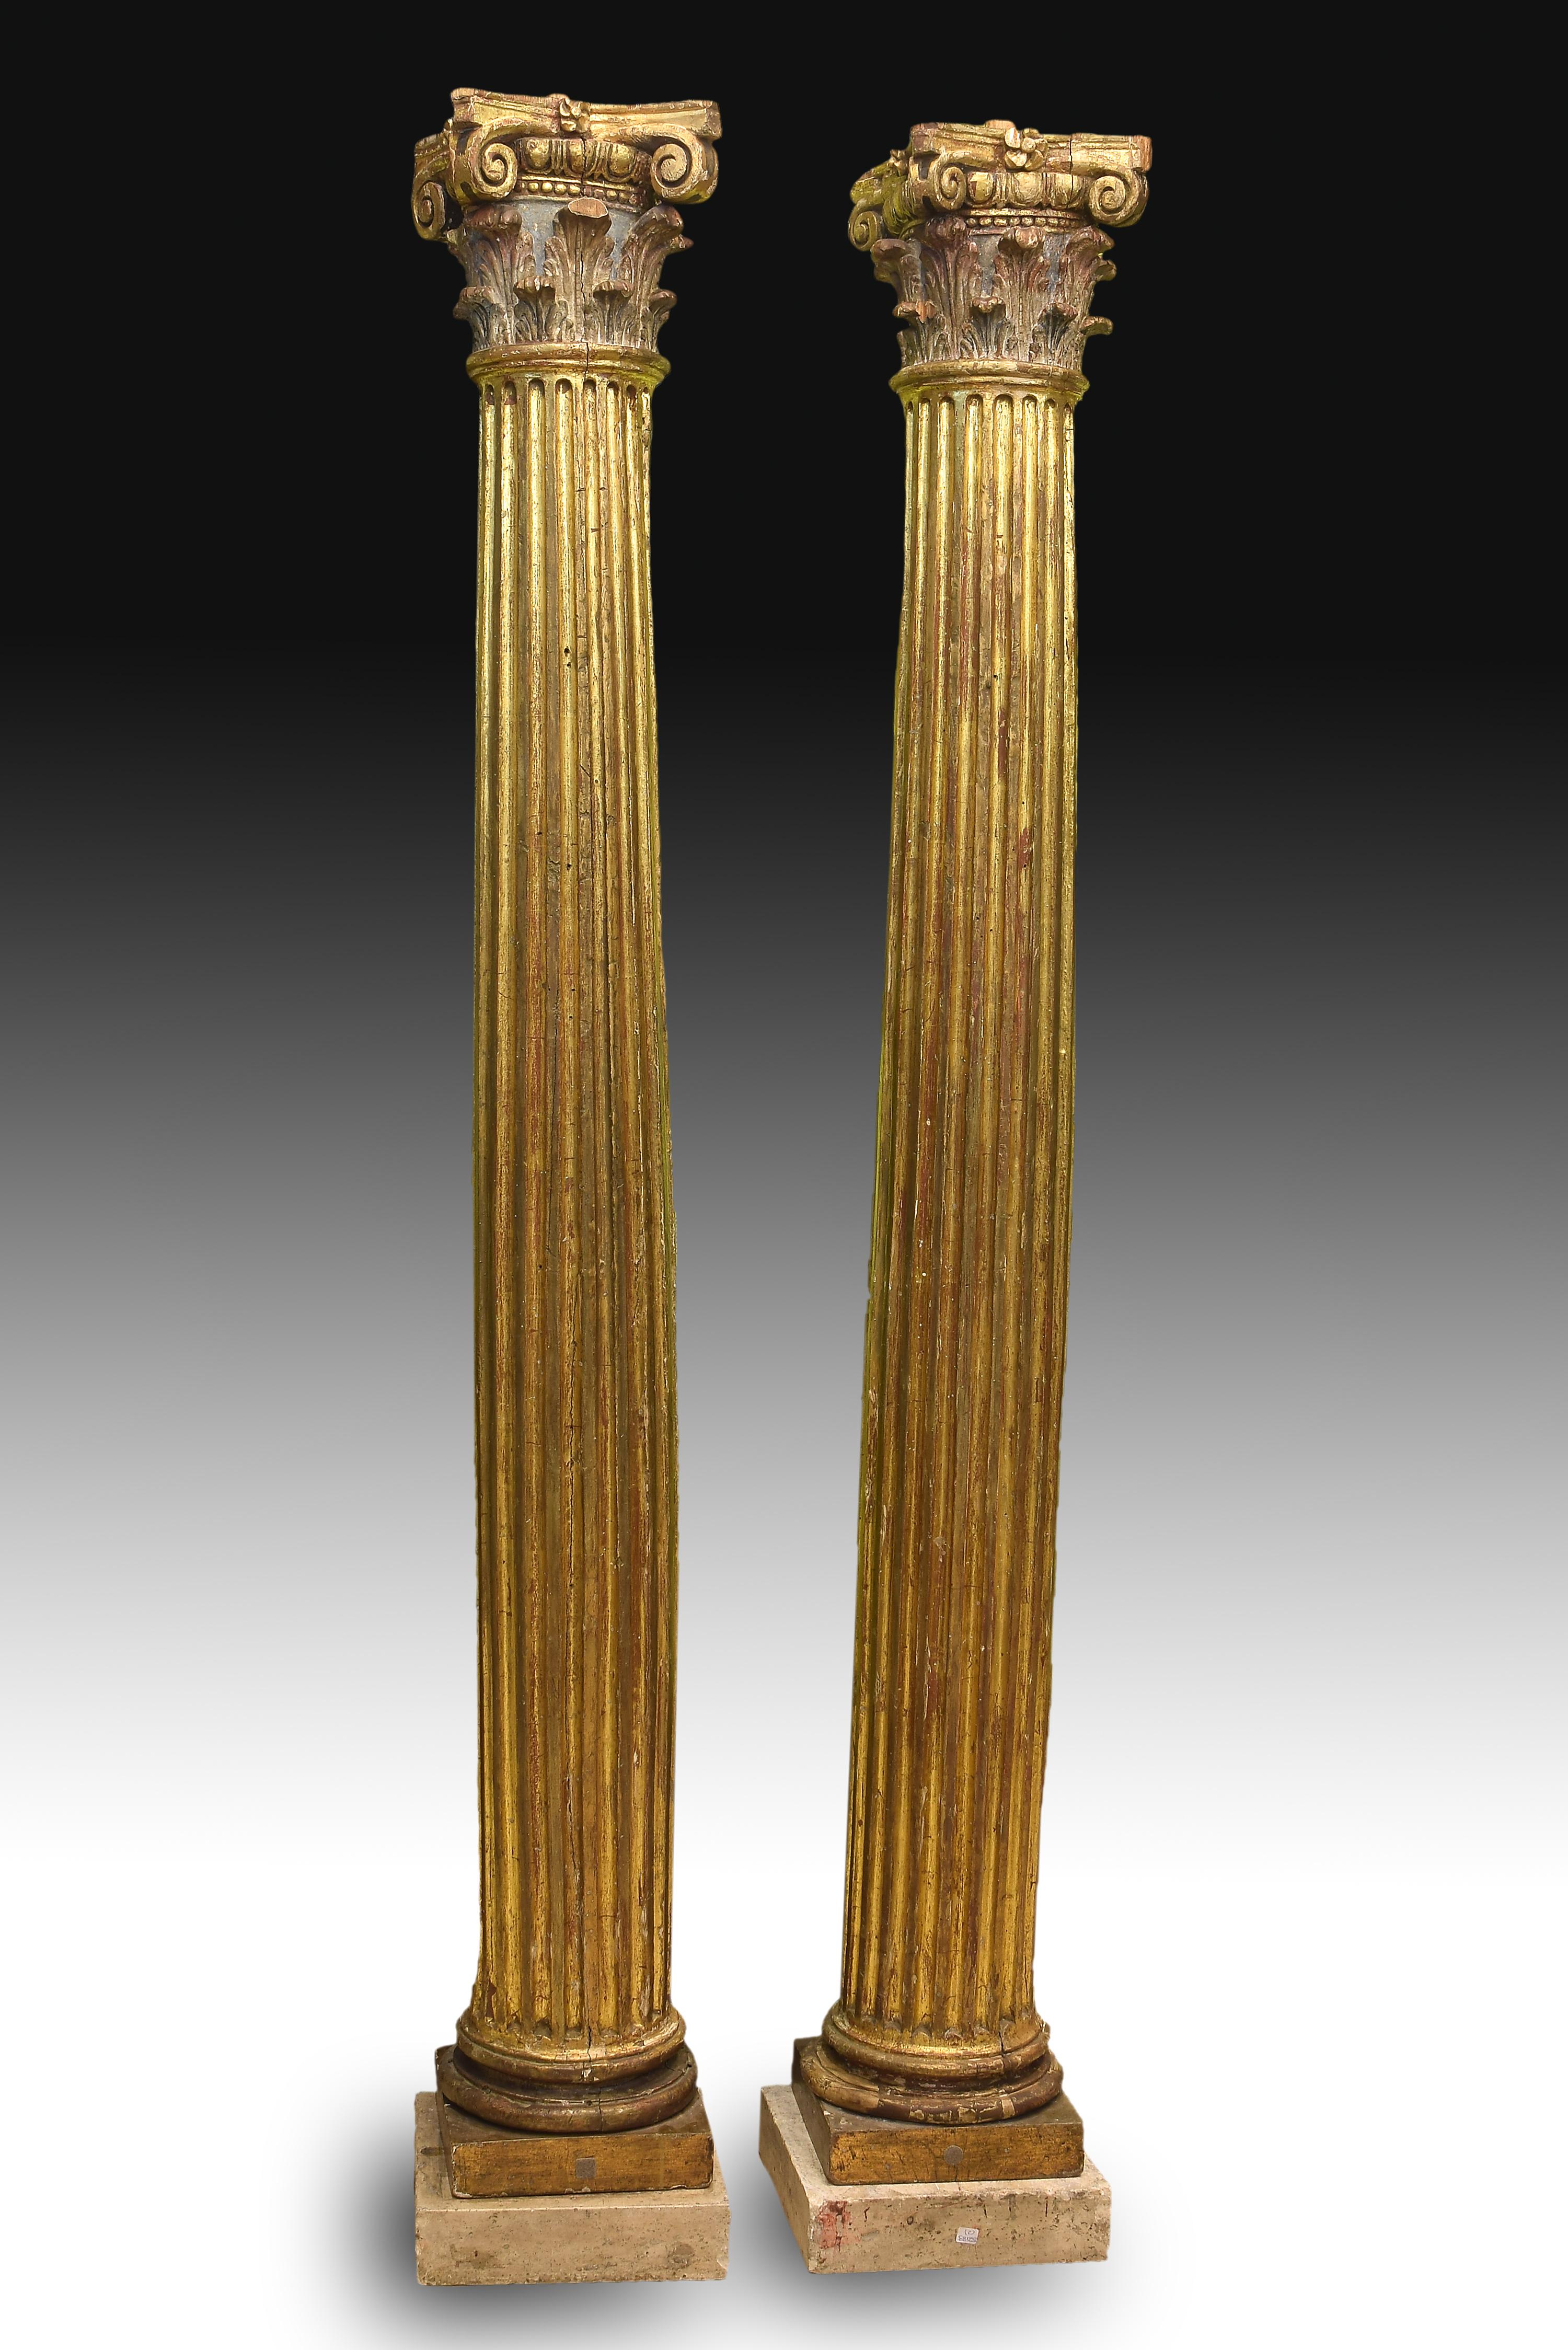 Pair of carved columns that have been left barely sketched and without polychrome or gilding on the back (something that would indicate their were part of a church altarpiece). Both practically equal, each one has a small square pedestal that